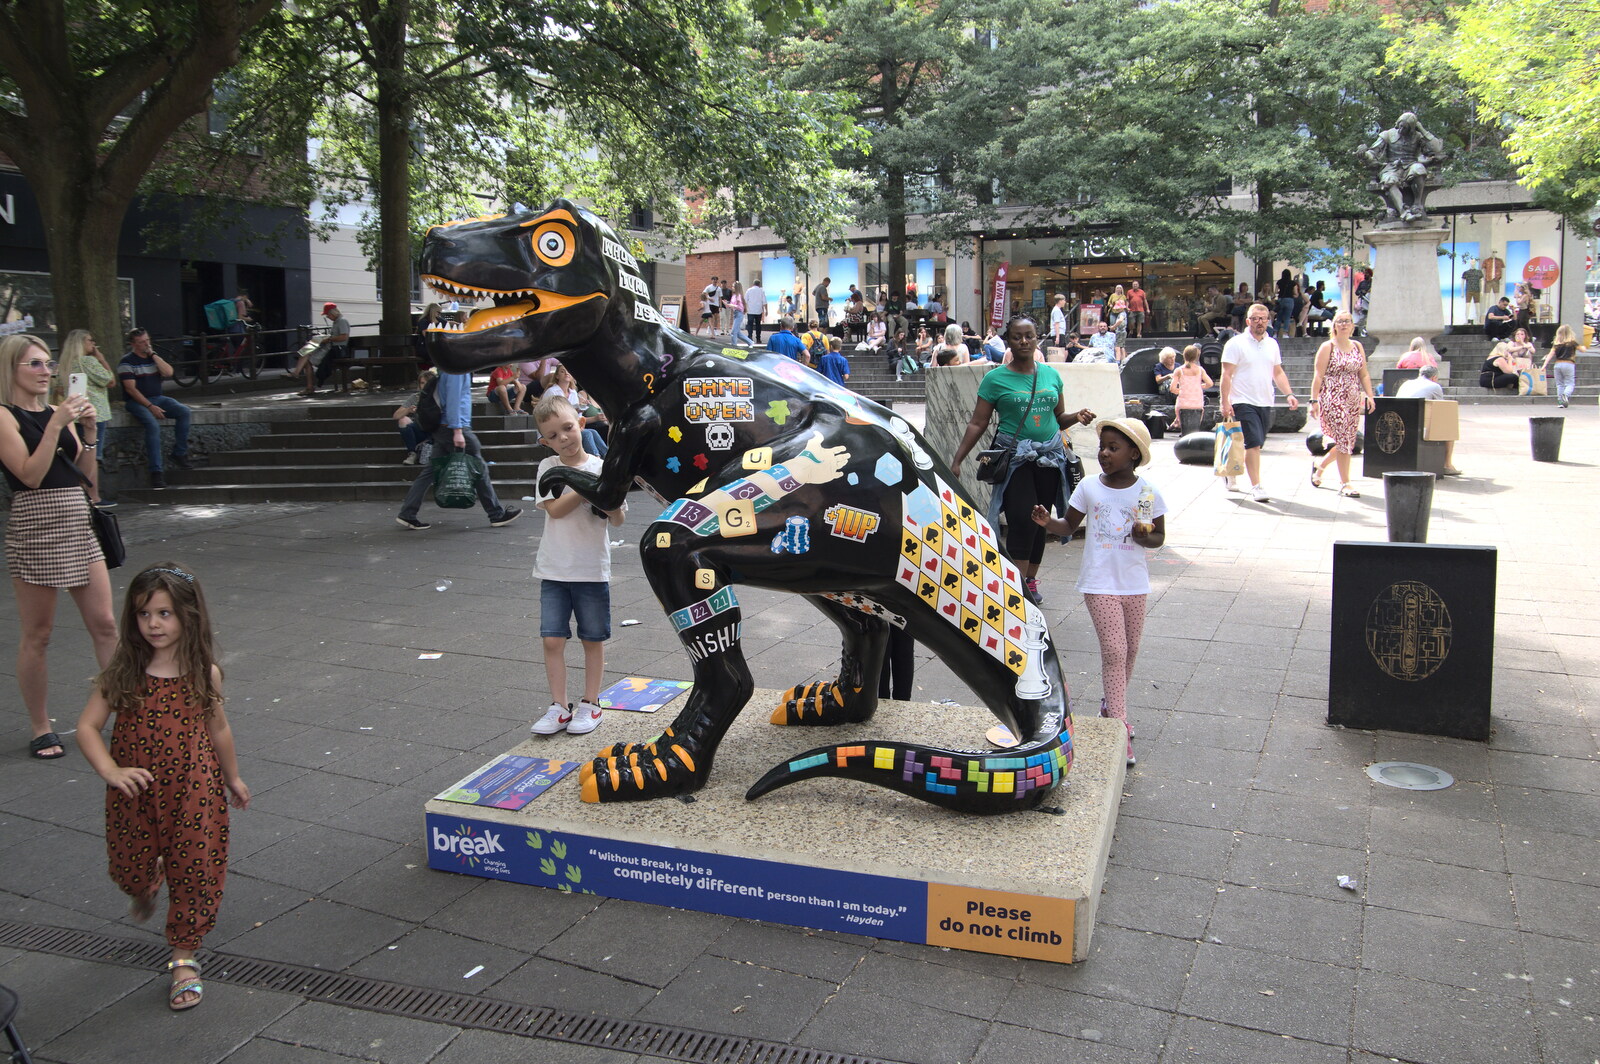 A July Miscellany, Diss, Eye and Norwich - 23rd July 2022: Another dinosaur on the Haymarket